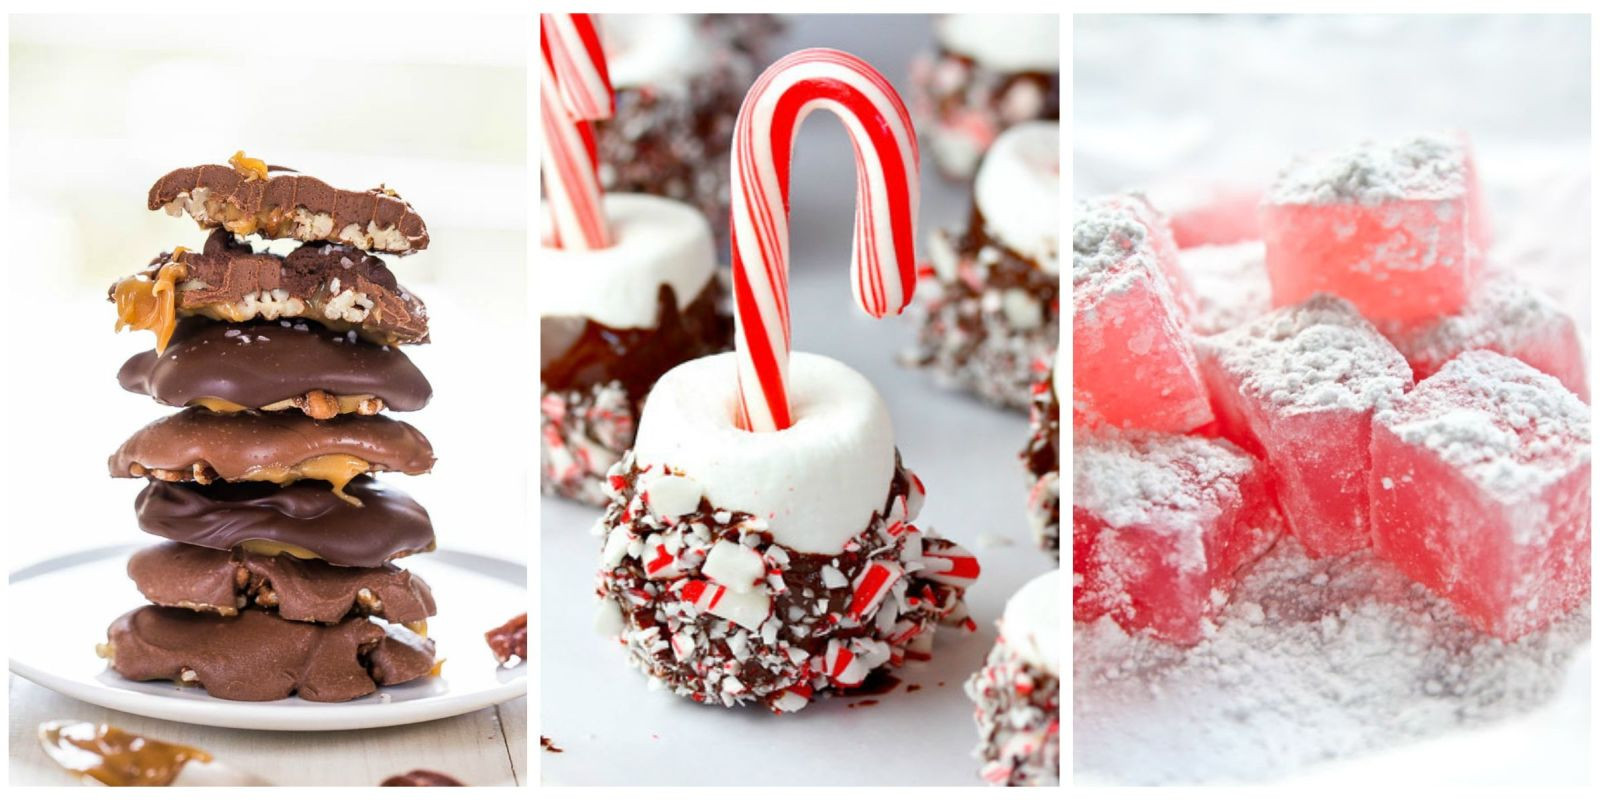 Easy Christmas Candy Recipes For Gifts
 25 Easy Christmas Candy Recipes Ideas for Homemade